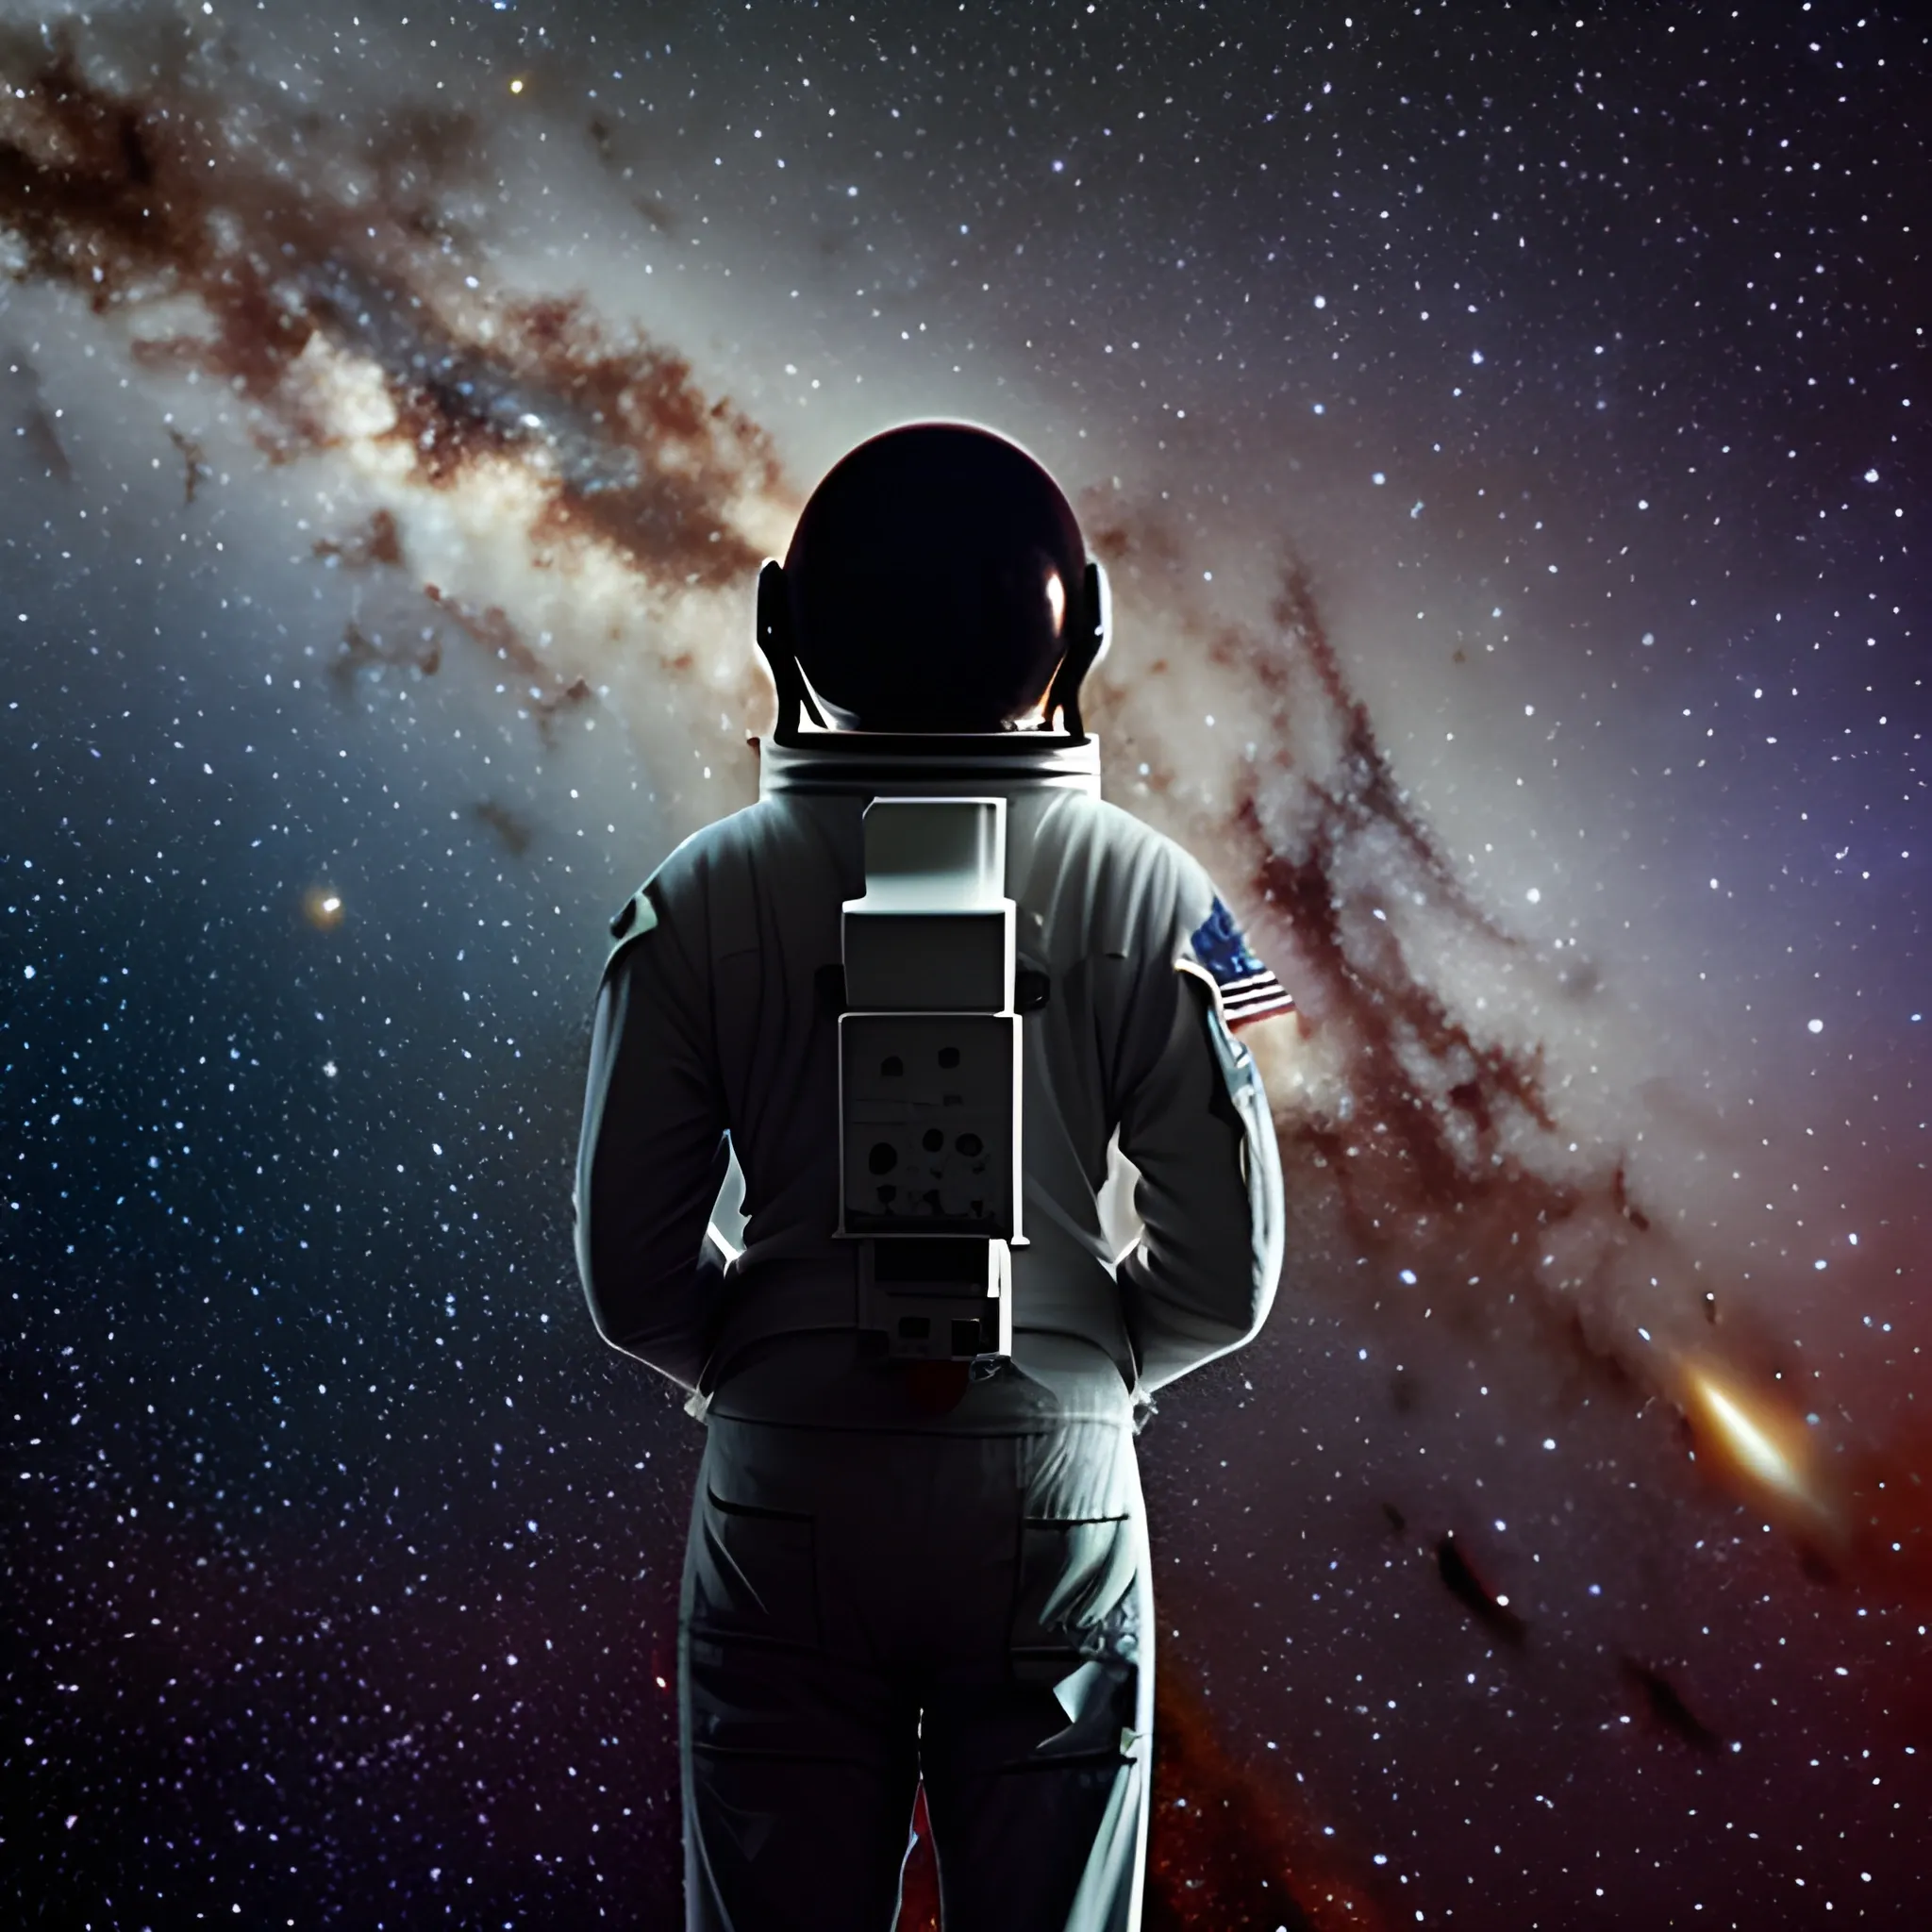 An astronaut looking at a galaxy, from the back.